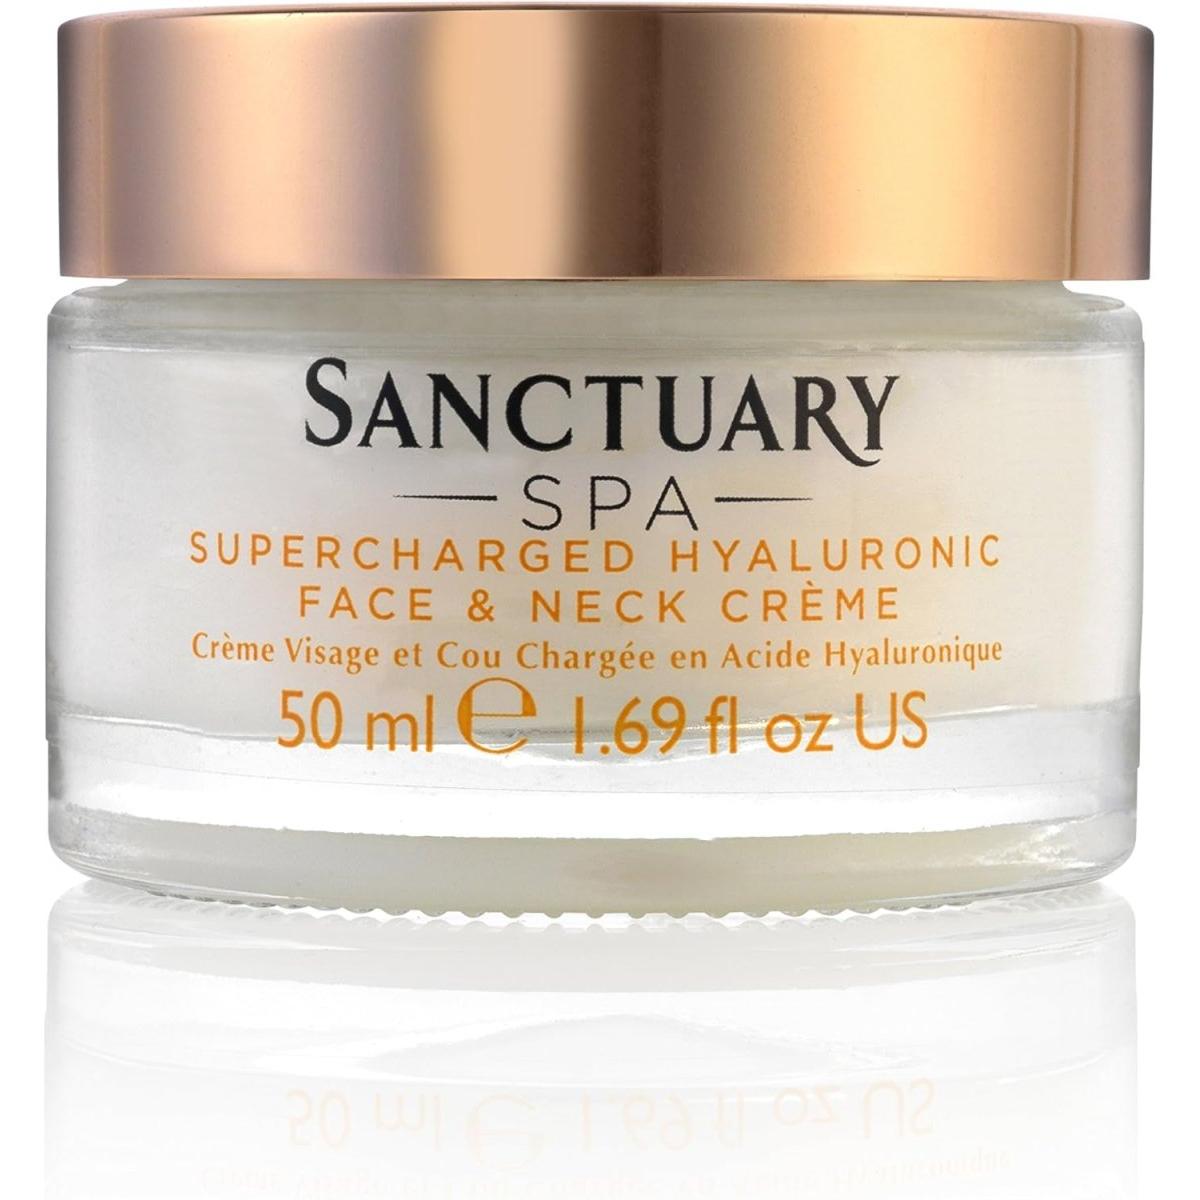 Sanctuary Spa Supercharged Hyaluronic Face and Neck Crème, 50 ml - Glam Global UK